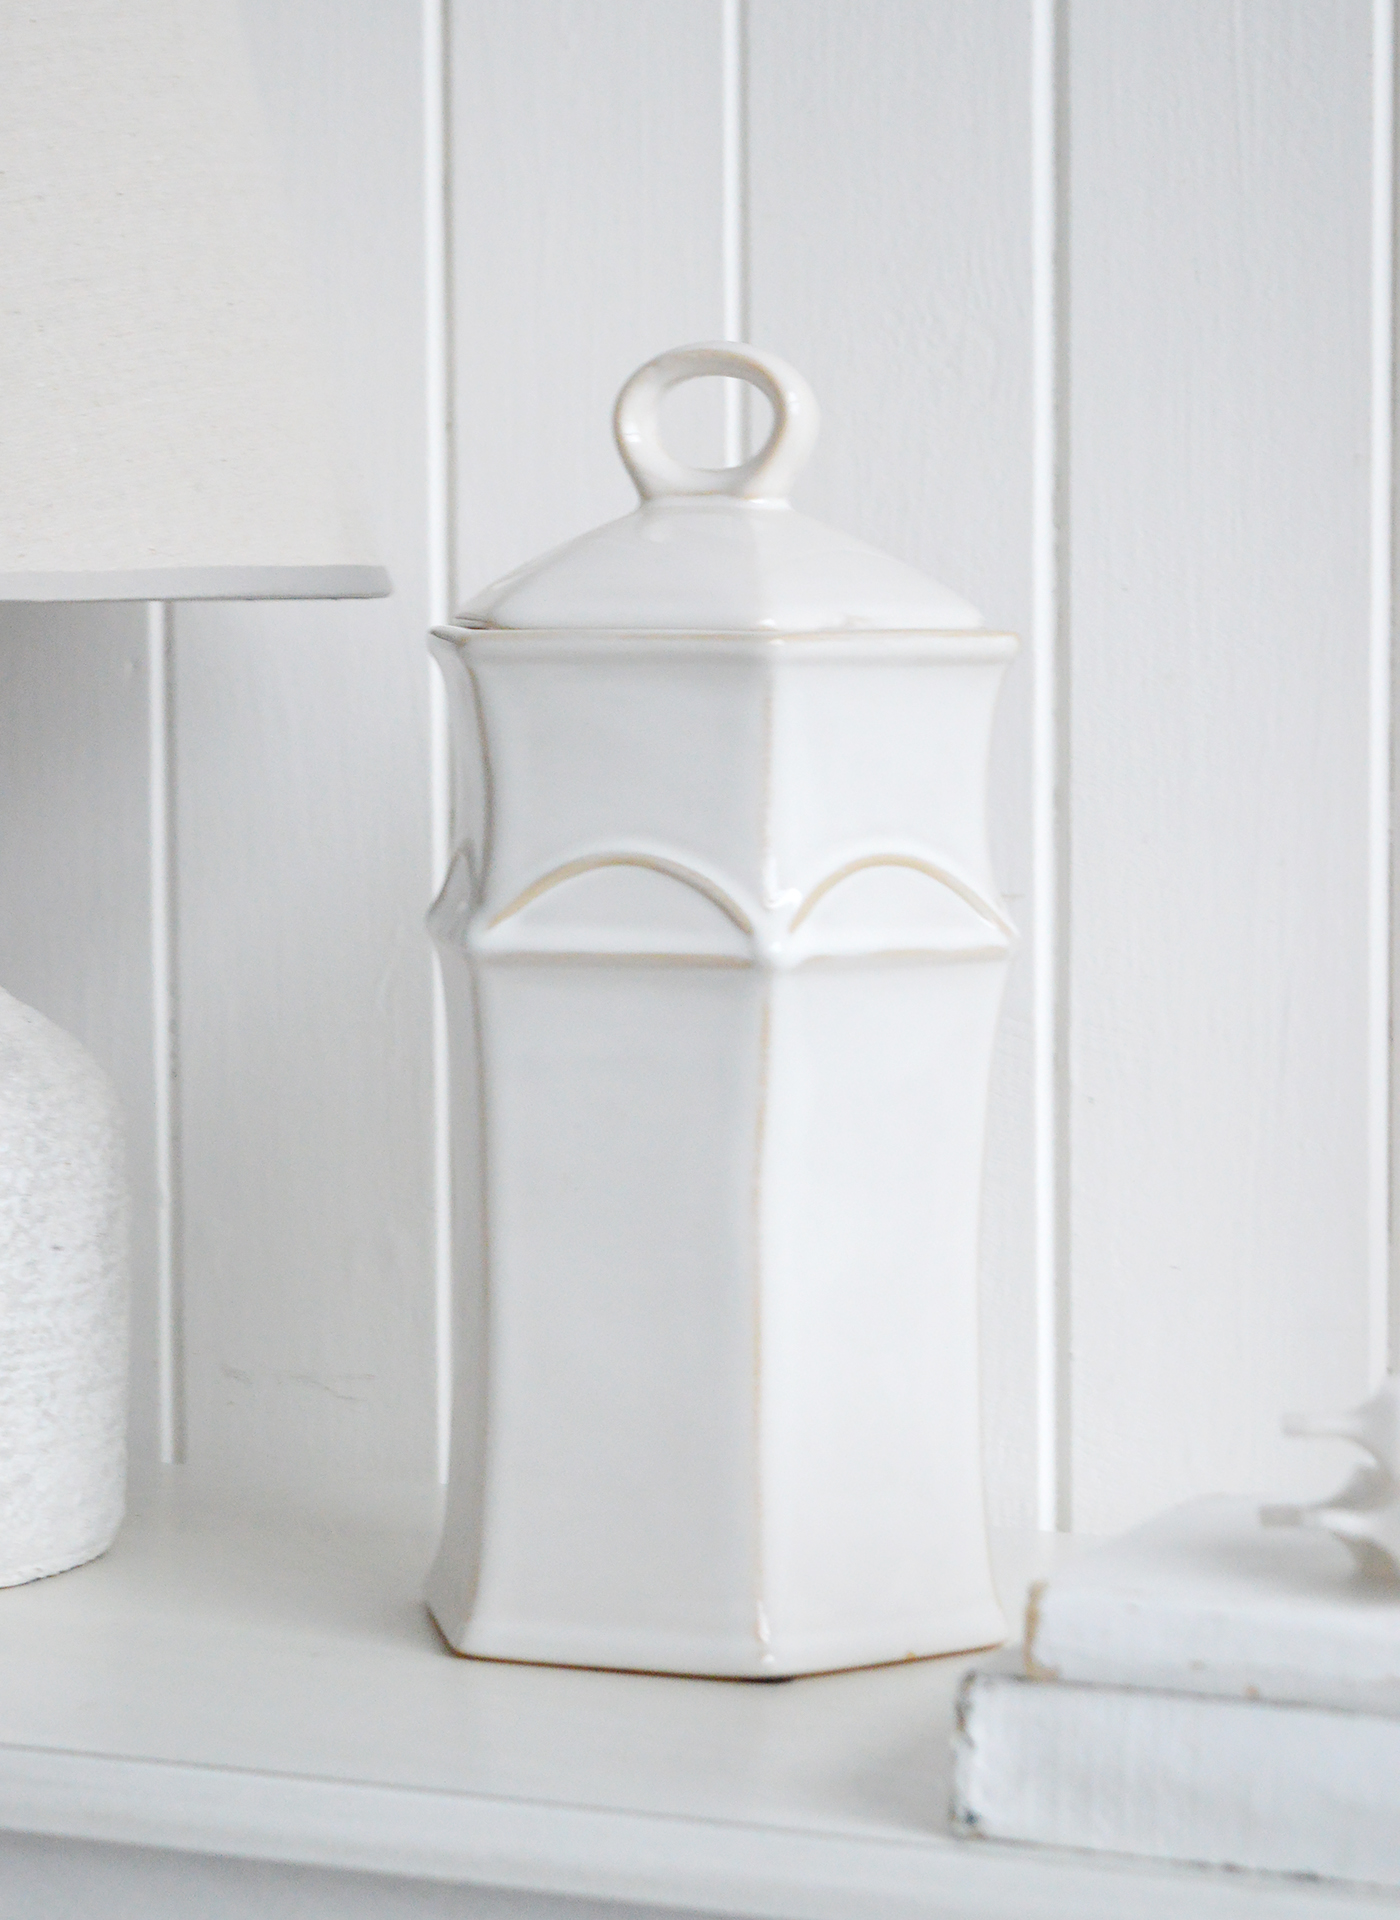 White tall ceramic jar - Console Table Styling in Hamptons Styled Home Interiors